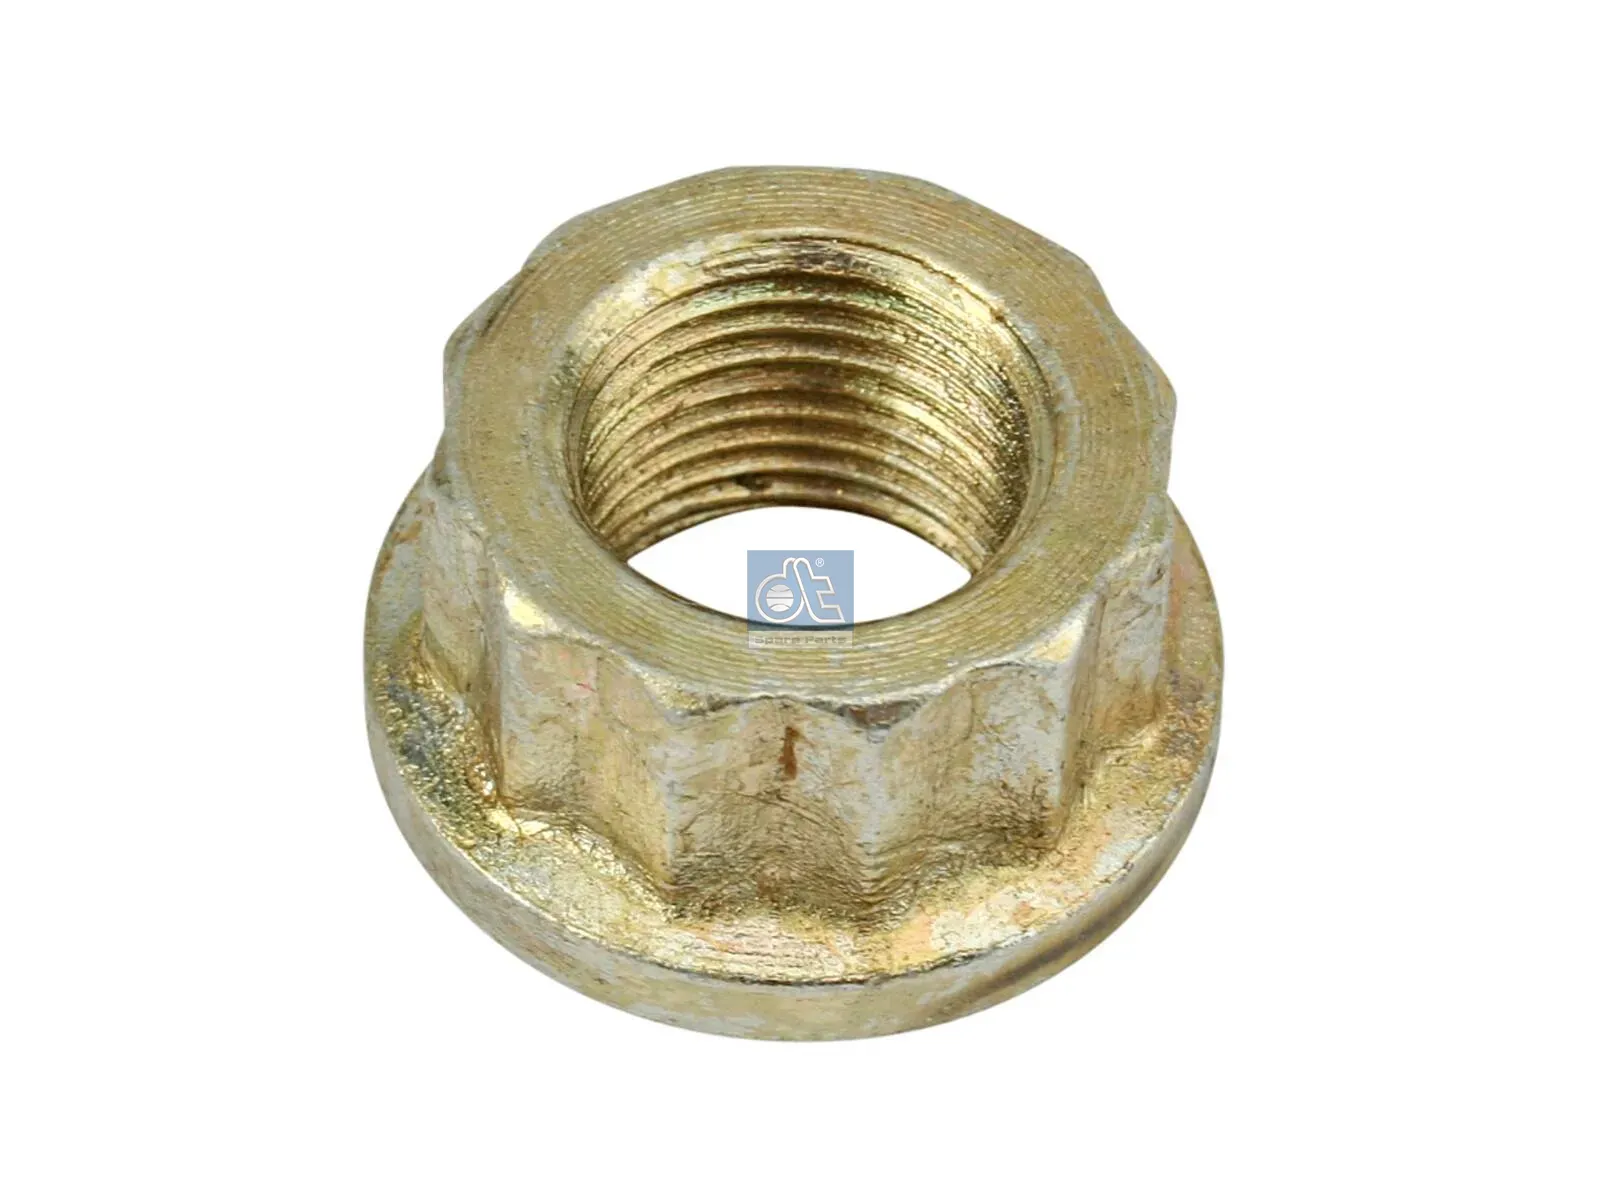 Connecting rod nut